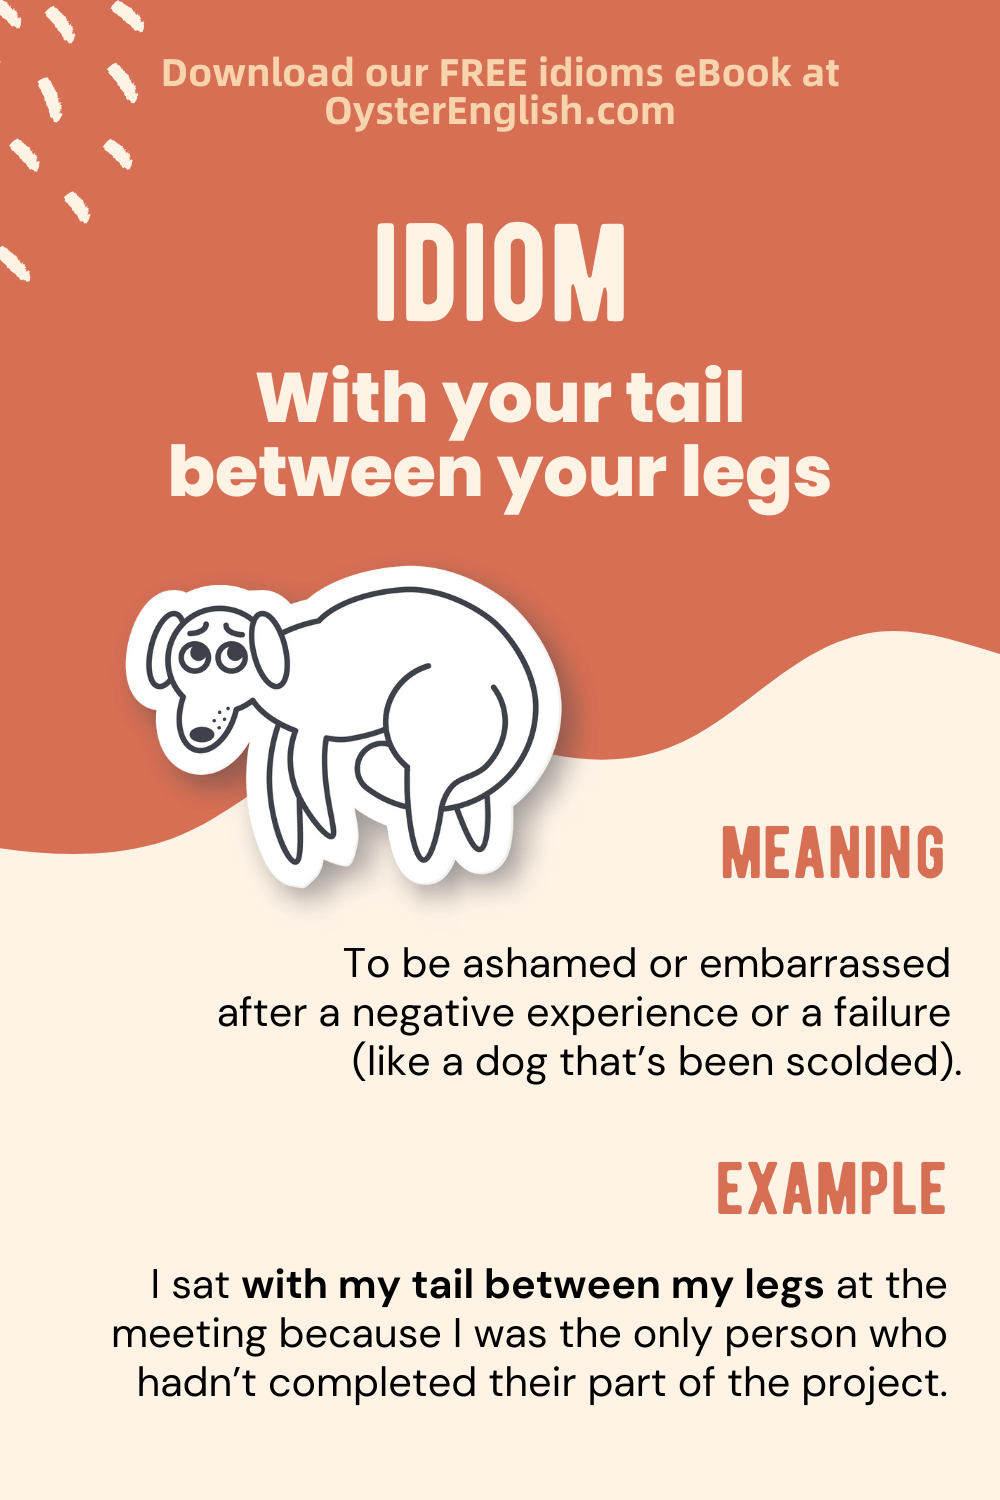 idiom with your tail between your legs